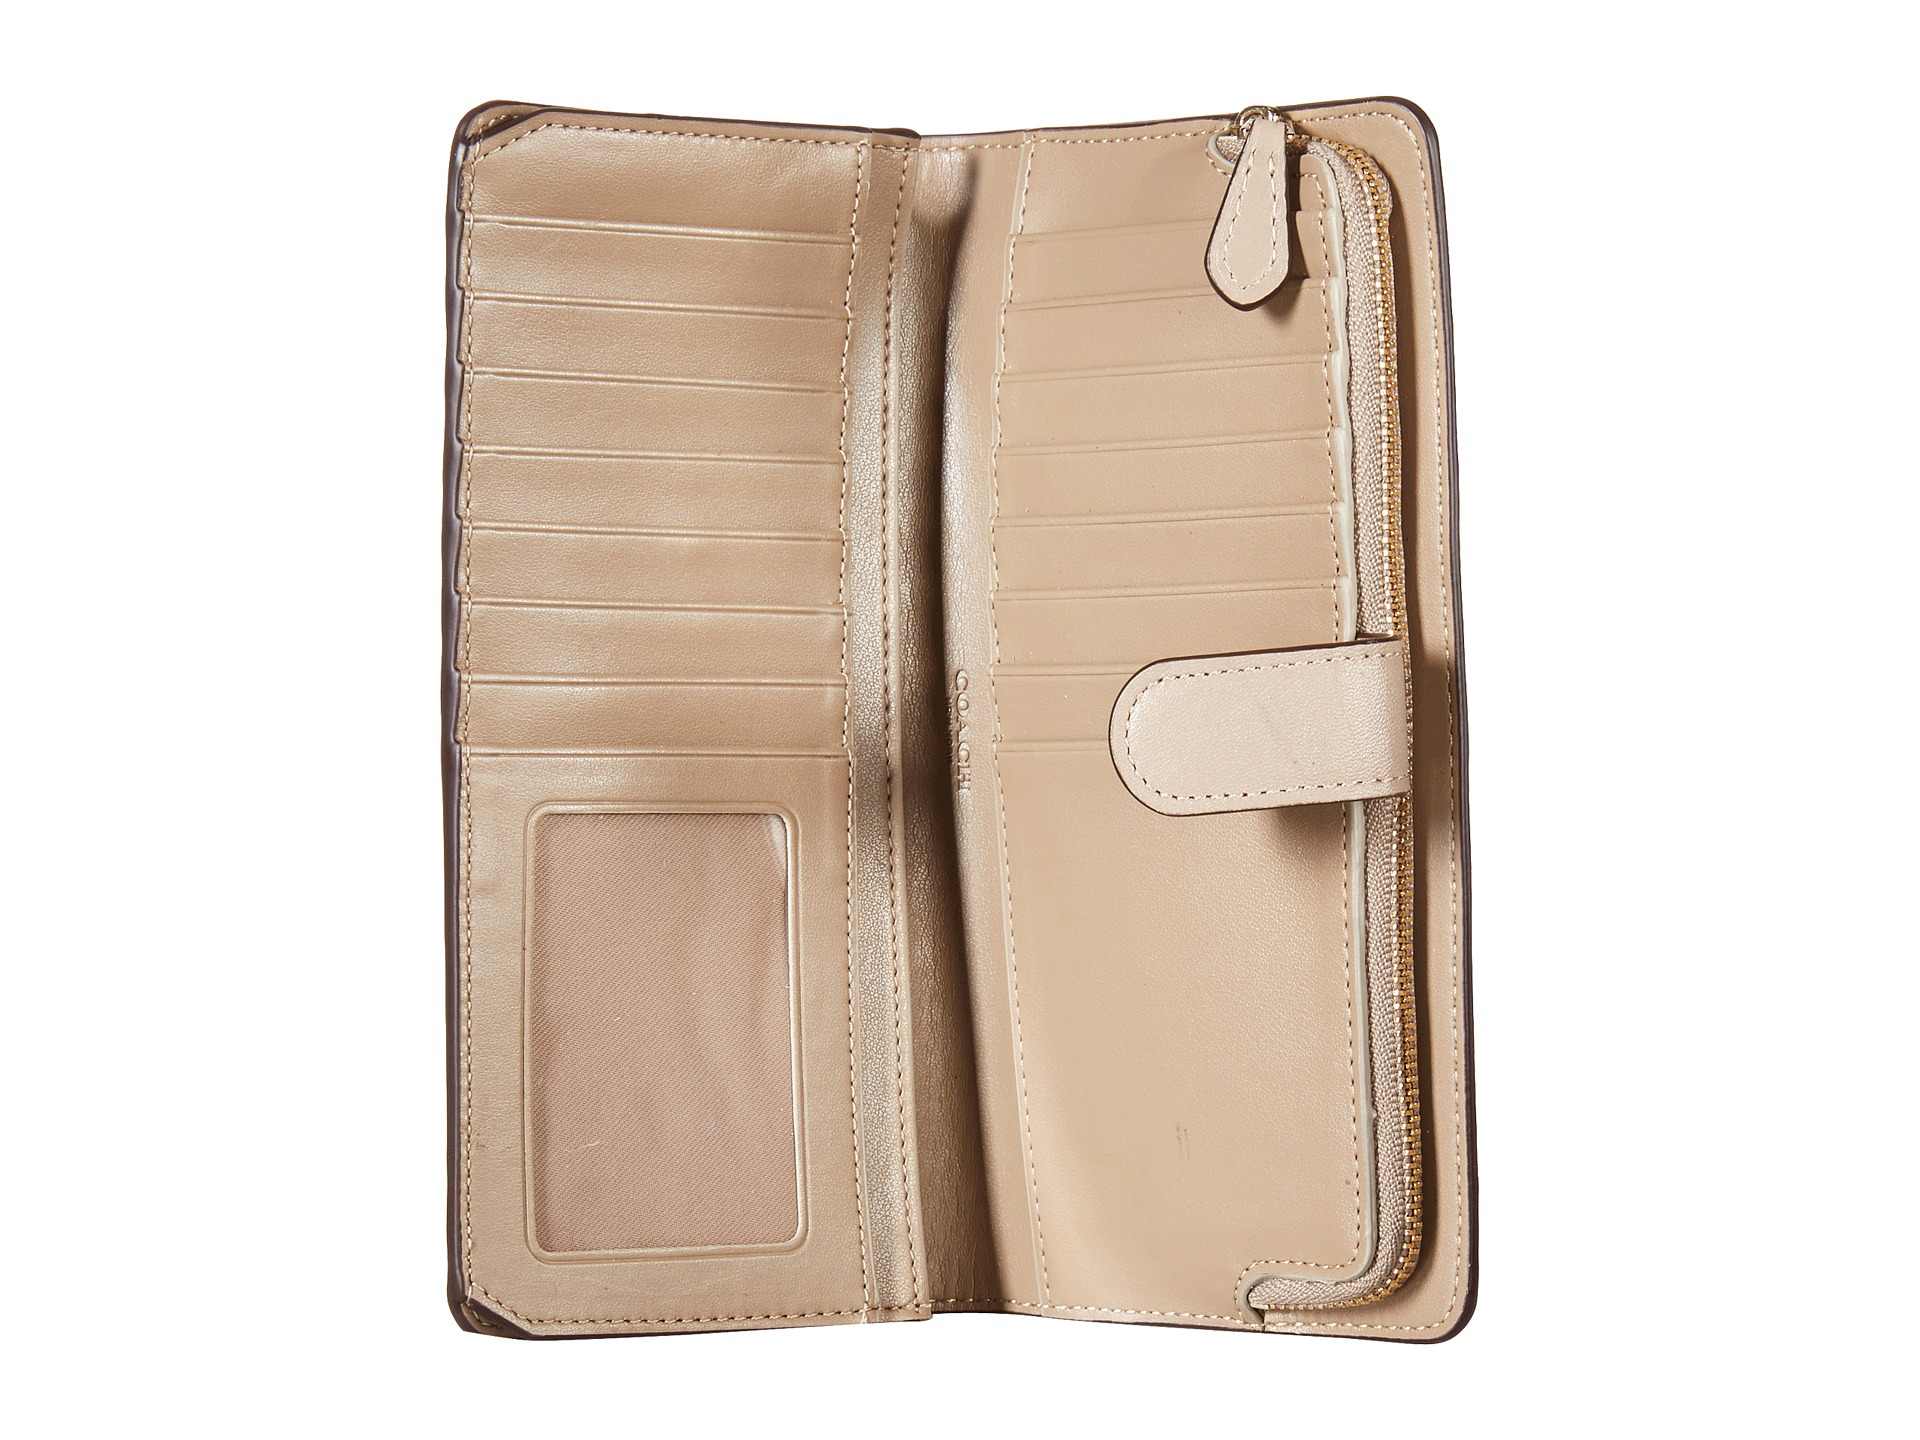 Lyst - Coach Madison Leather Skinny Wallet in Natural